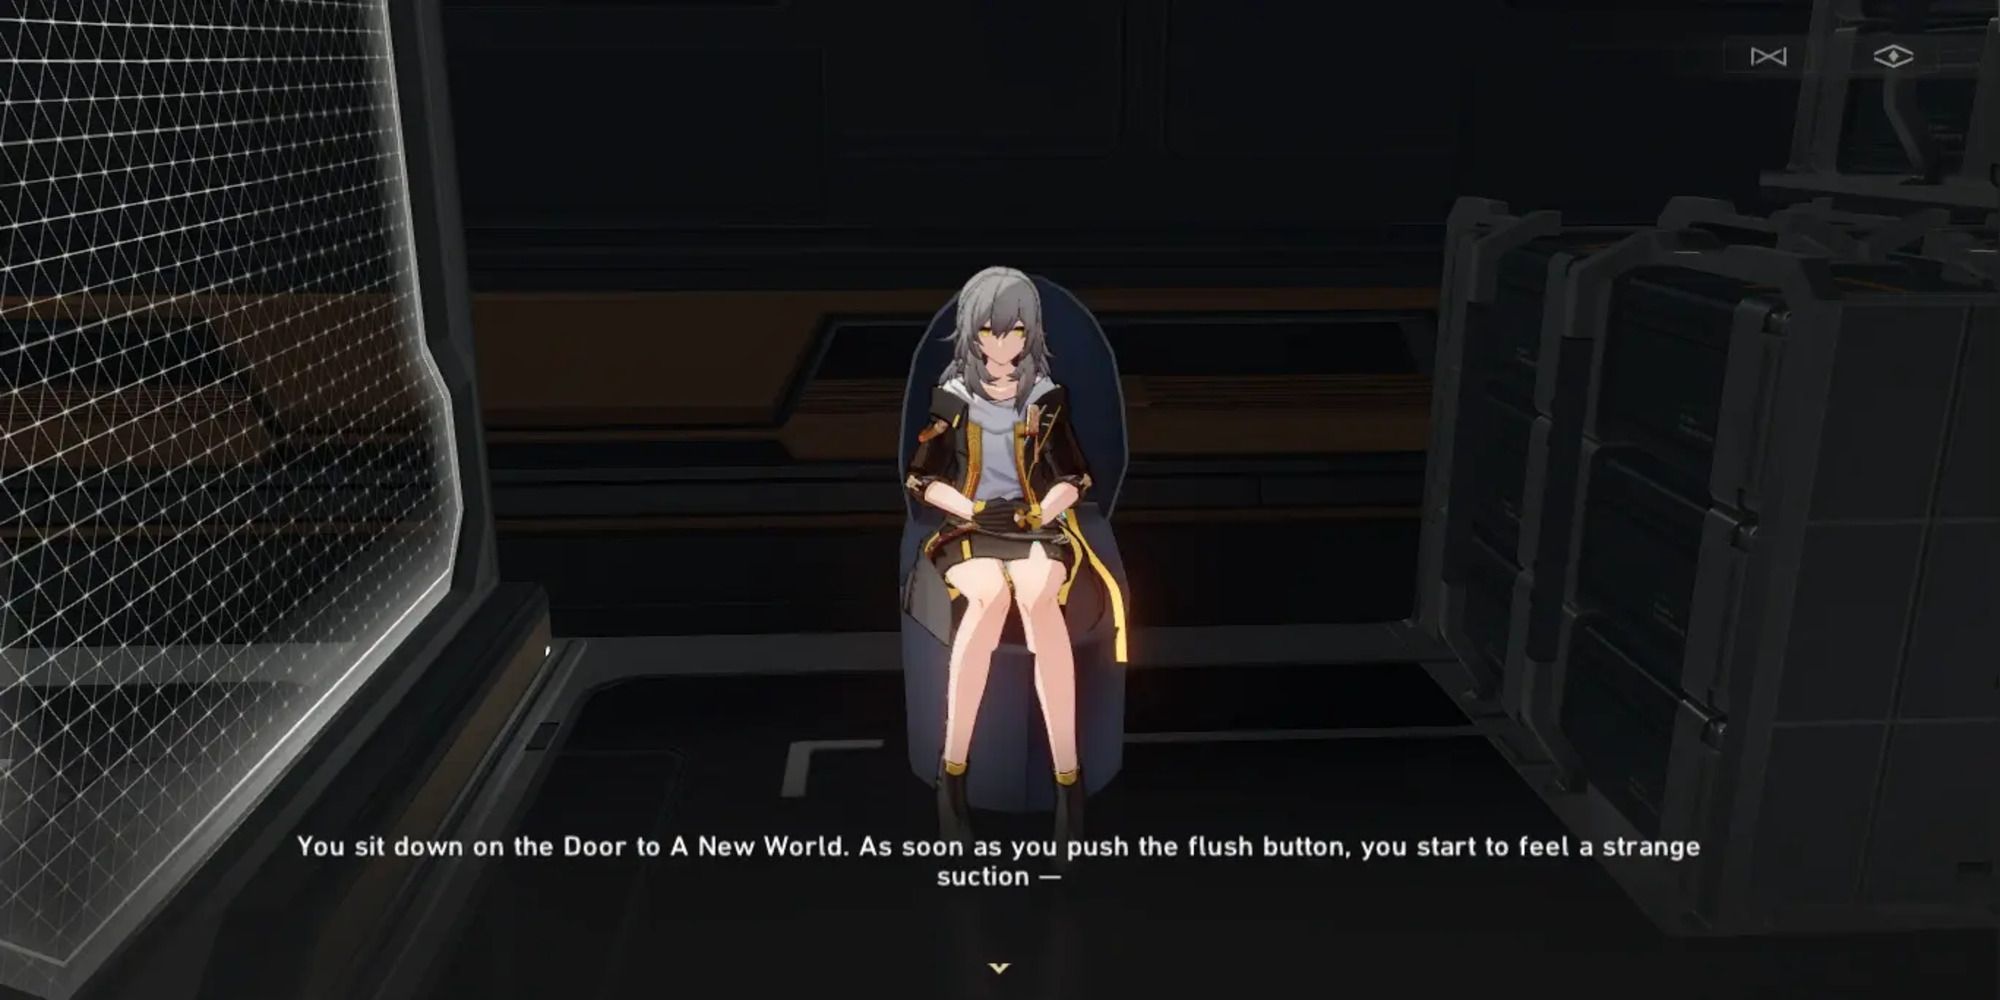 Stella from Honkai: Star Rail is sitting on a teleported toilet